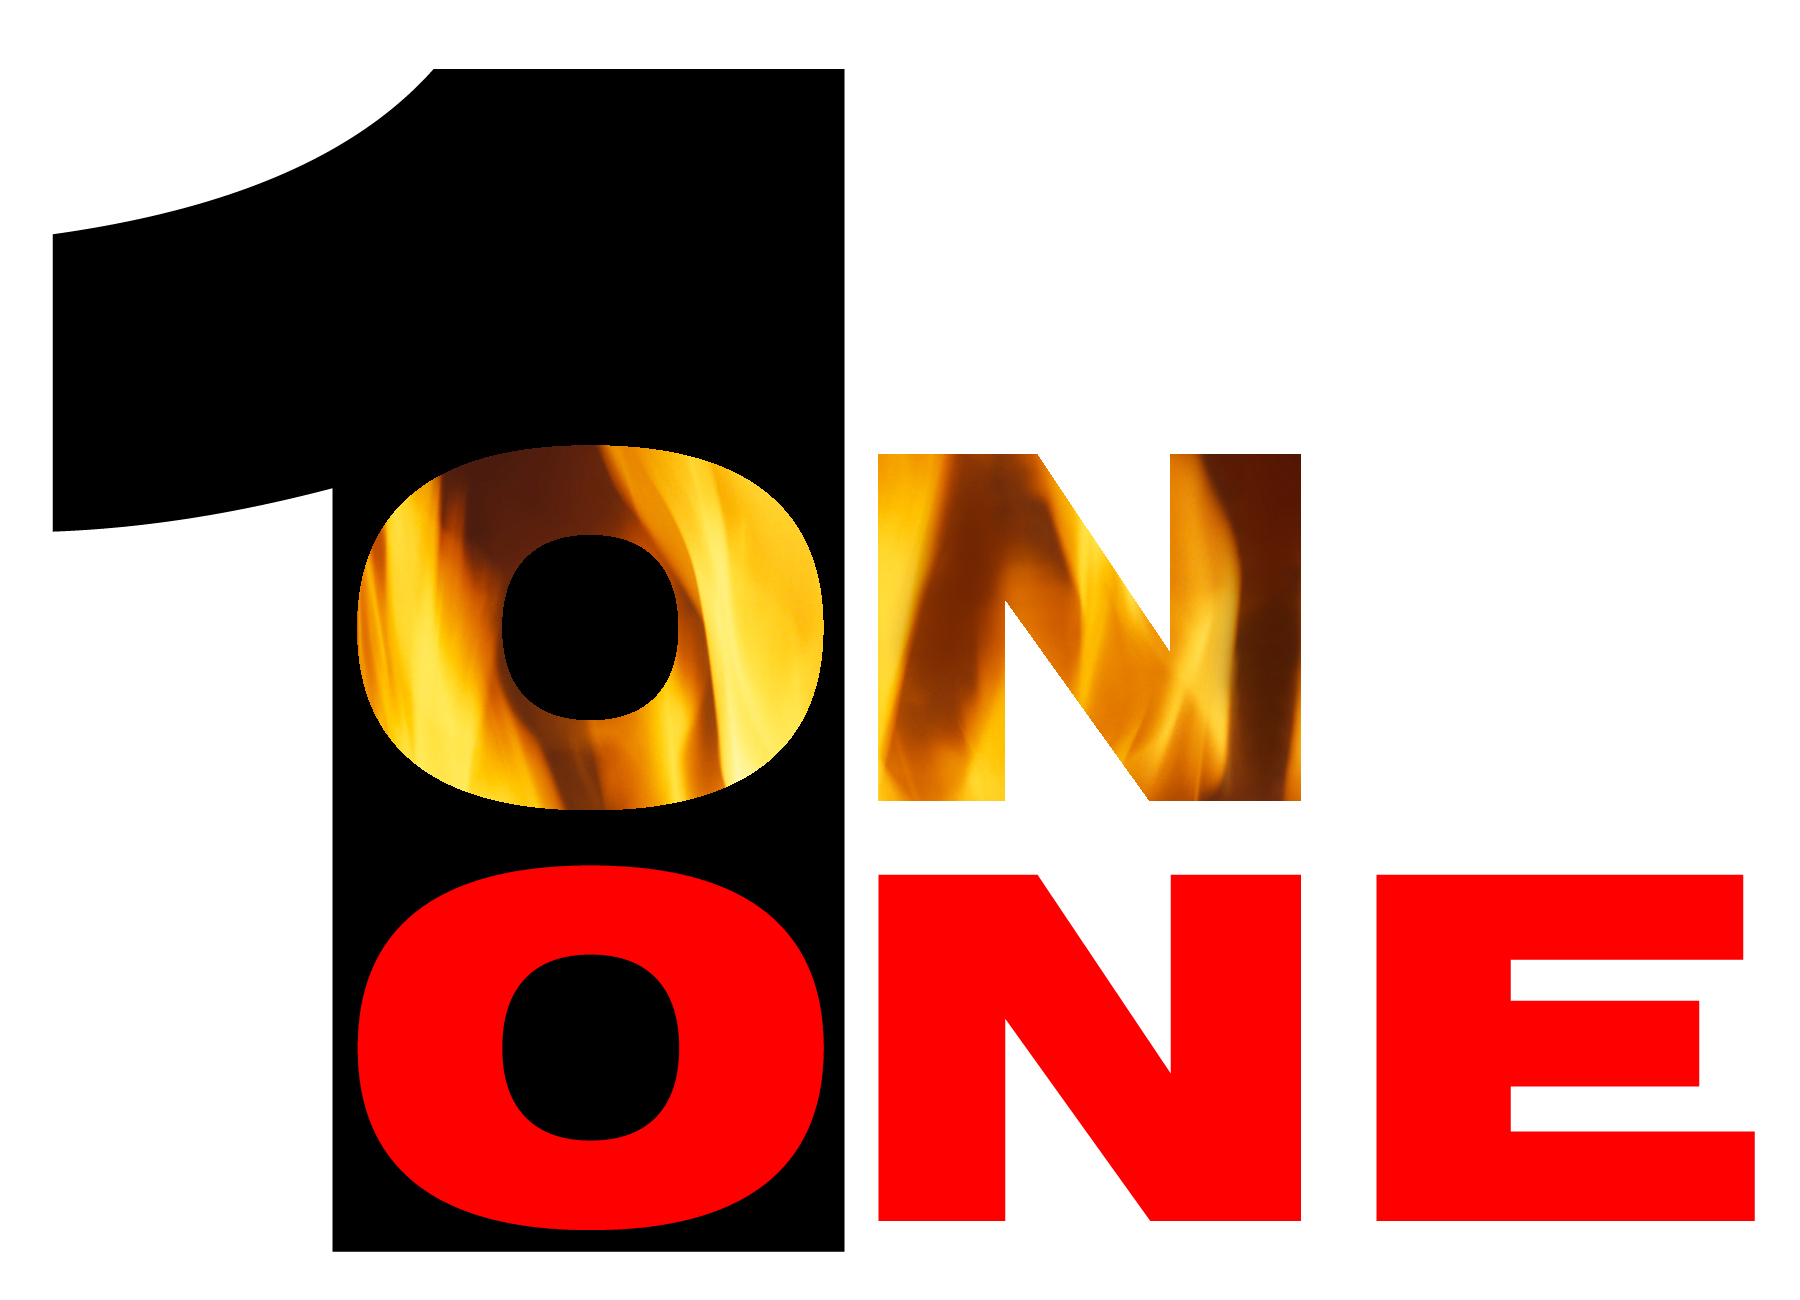 1on1 High Res Logo